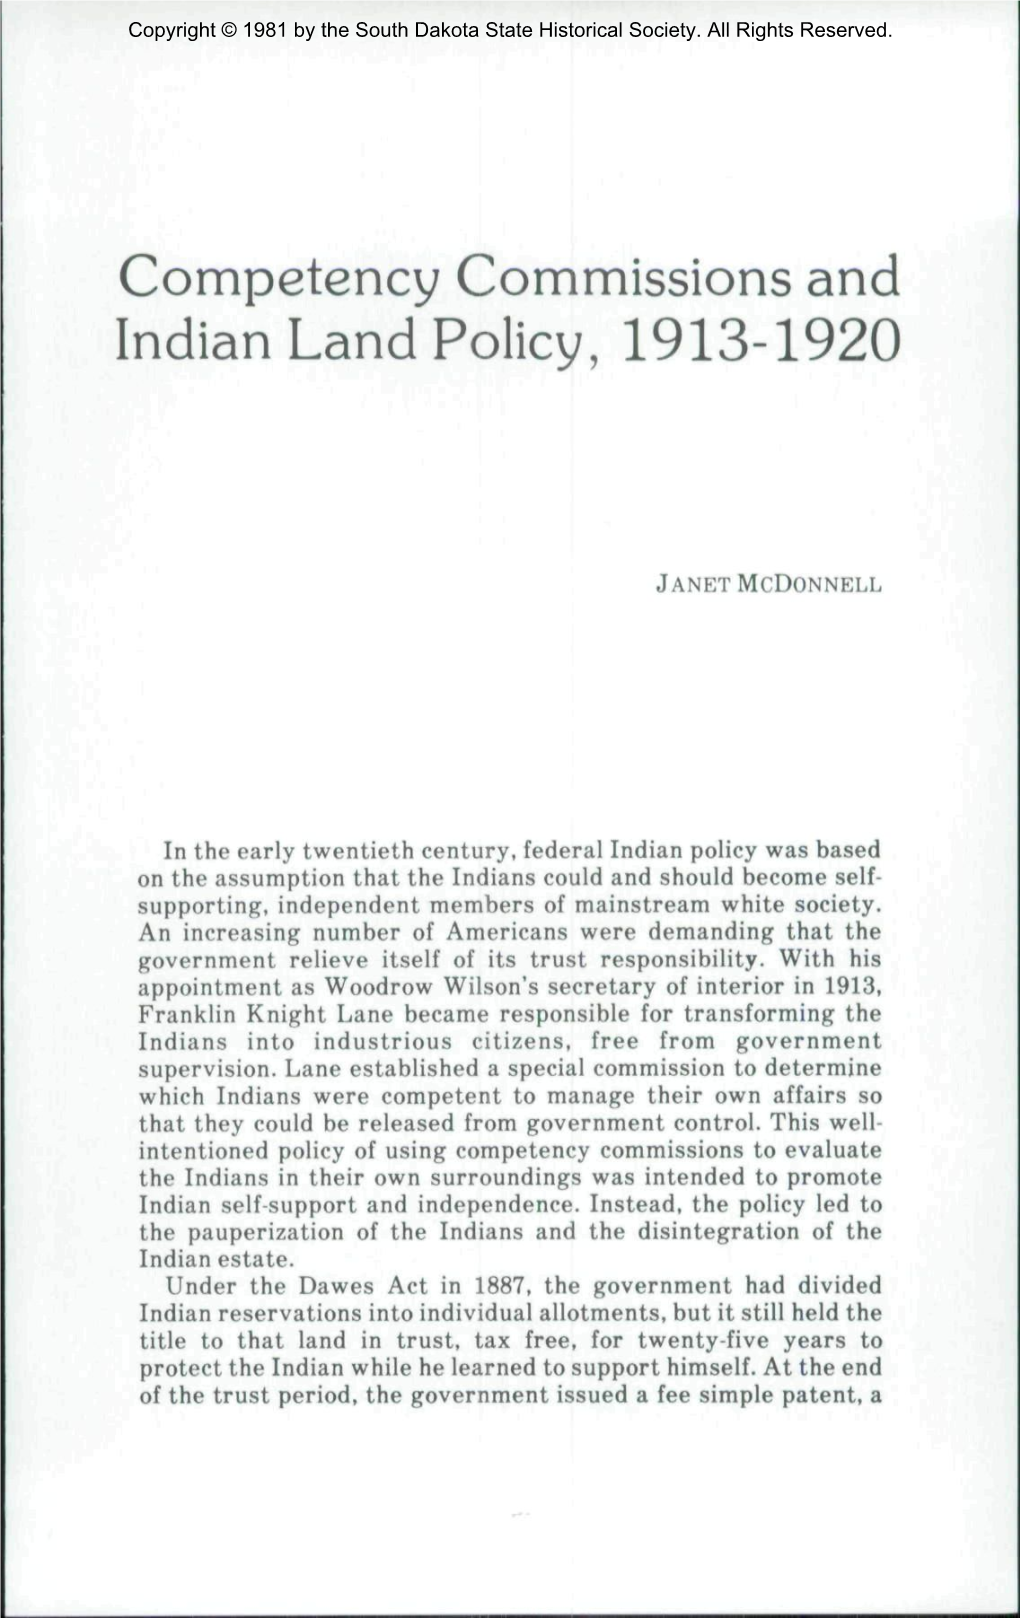 Competency Commissions and Indian Land Policy, 1913-1920